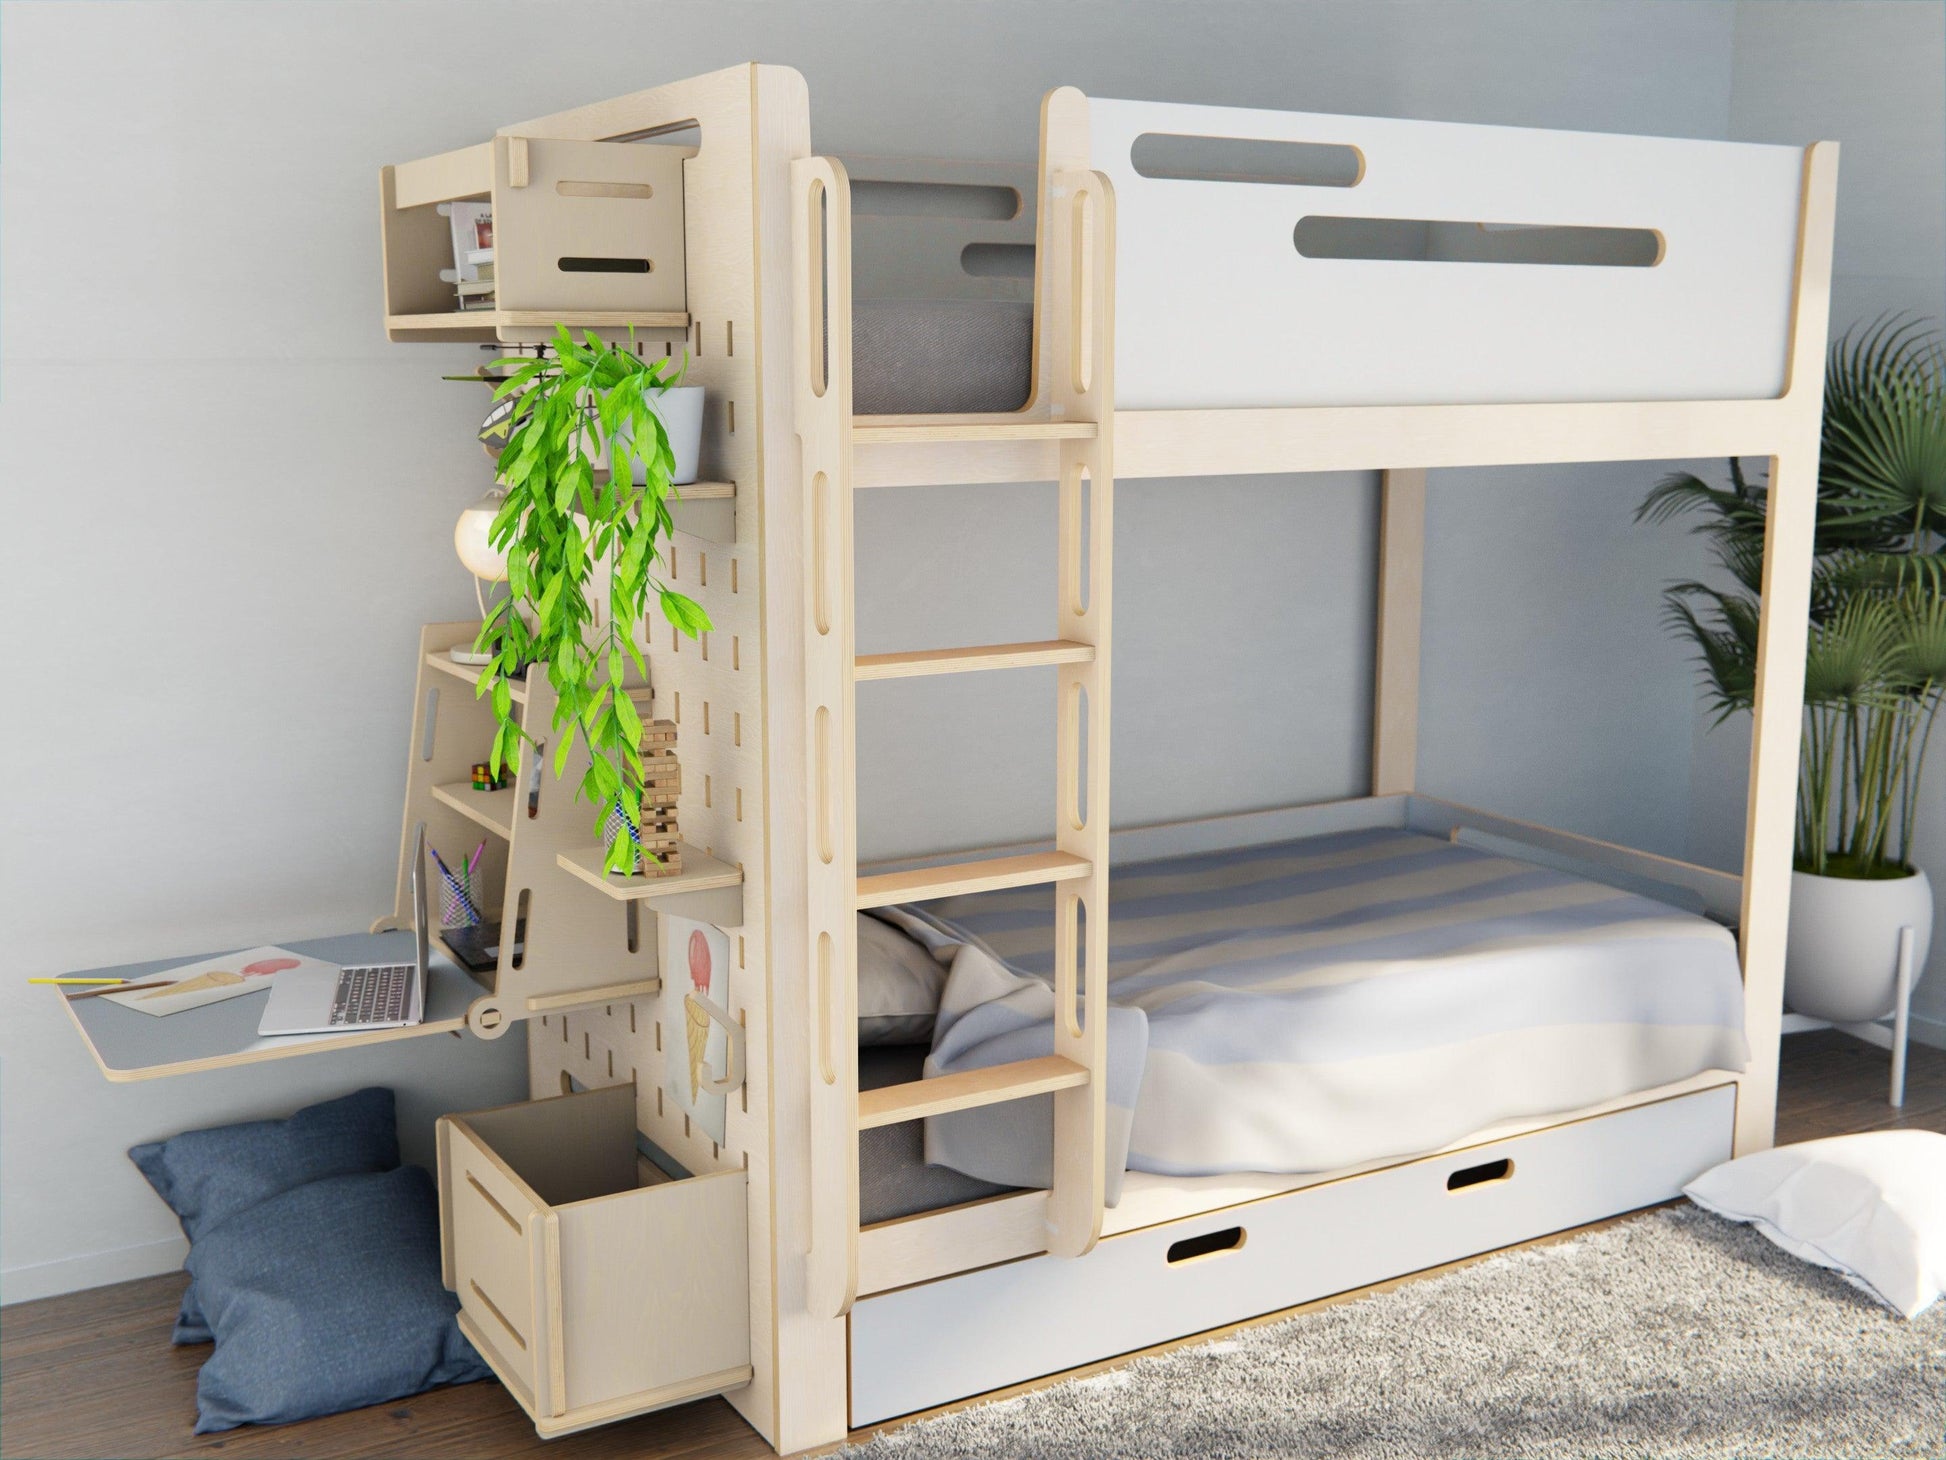 Check out our multi-functional bunk beds with study set and storage drawer. Available in white.